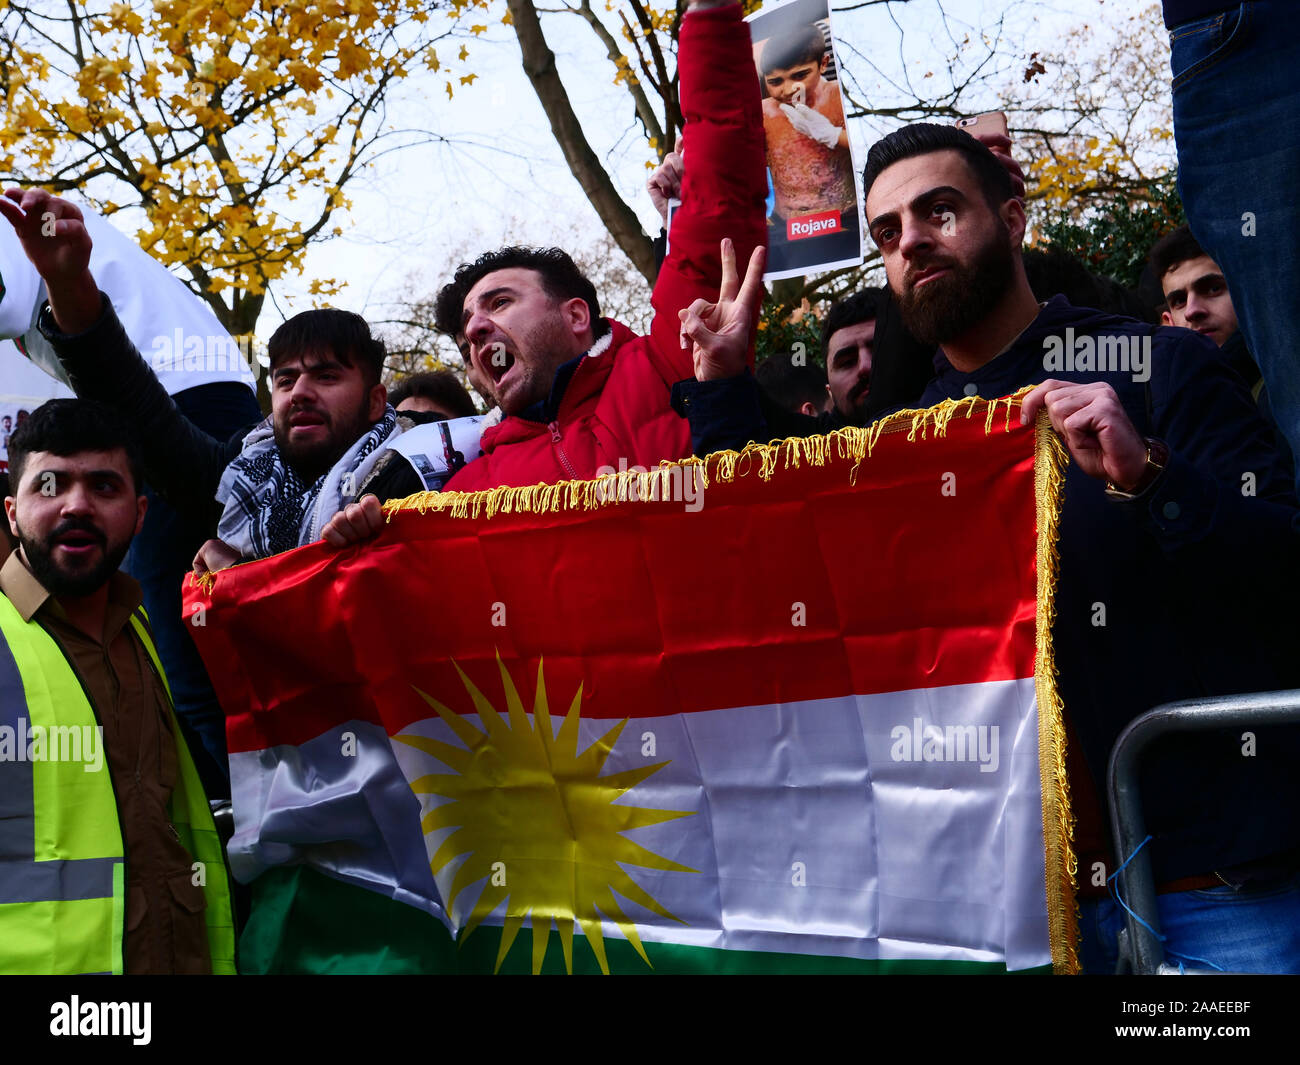 London, UK. 20th November, 2019. Iranians from London protest outside the Iranian embassy against the alleged abuses by the government of Iran, demanding democracy and freedom for the Kurdish population. Credit: Joe Kuis / Alamy News Stock Photo